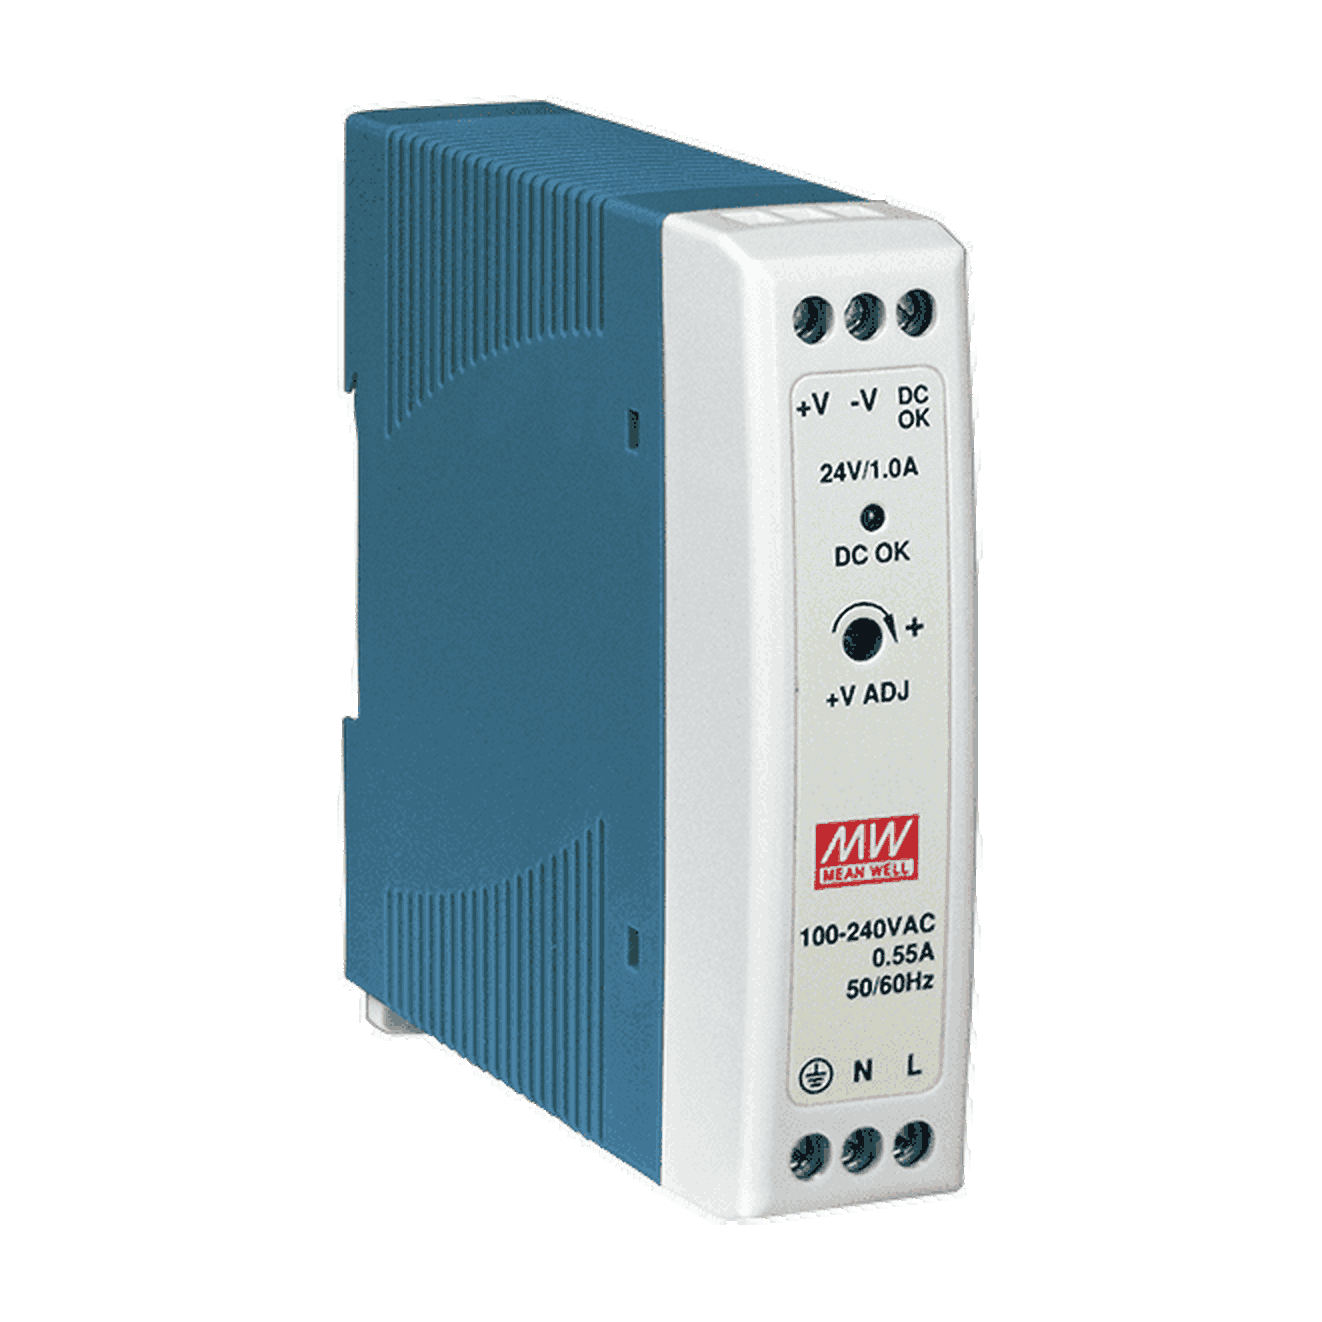 MDR-20-24 Mean Well SMPS 24V 1A Compact DIN Rail Power Supply | Reliable Performance - voltkart - MEANWELL - 